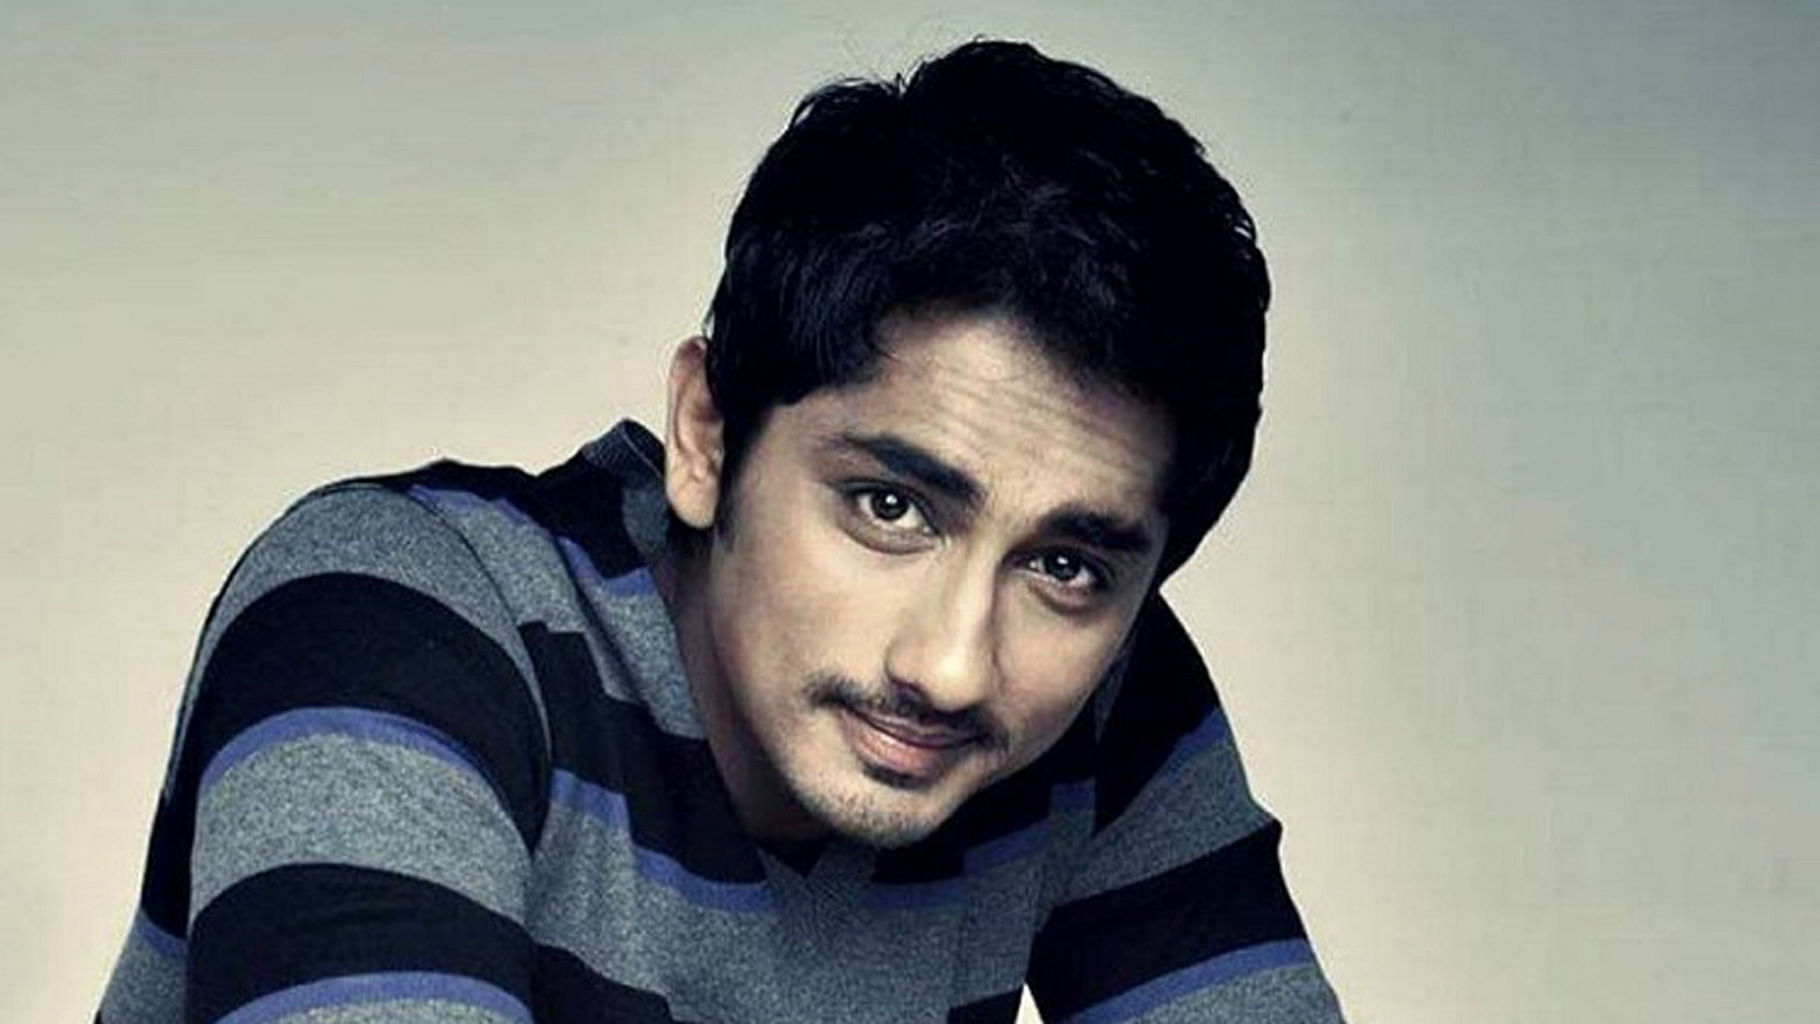 File image of South Indian actor Siddharth, of the ‘Rang De Basanti’ fame.